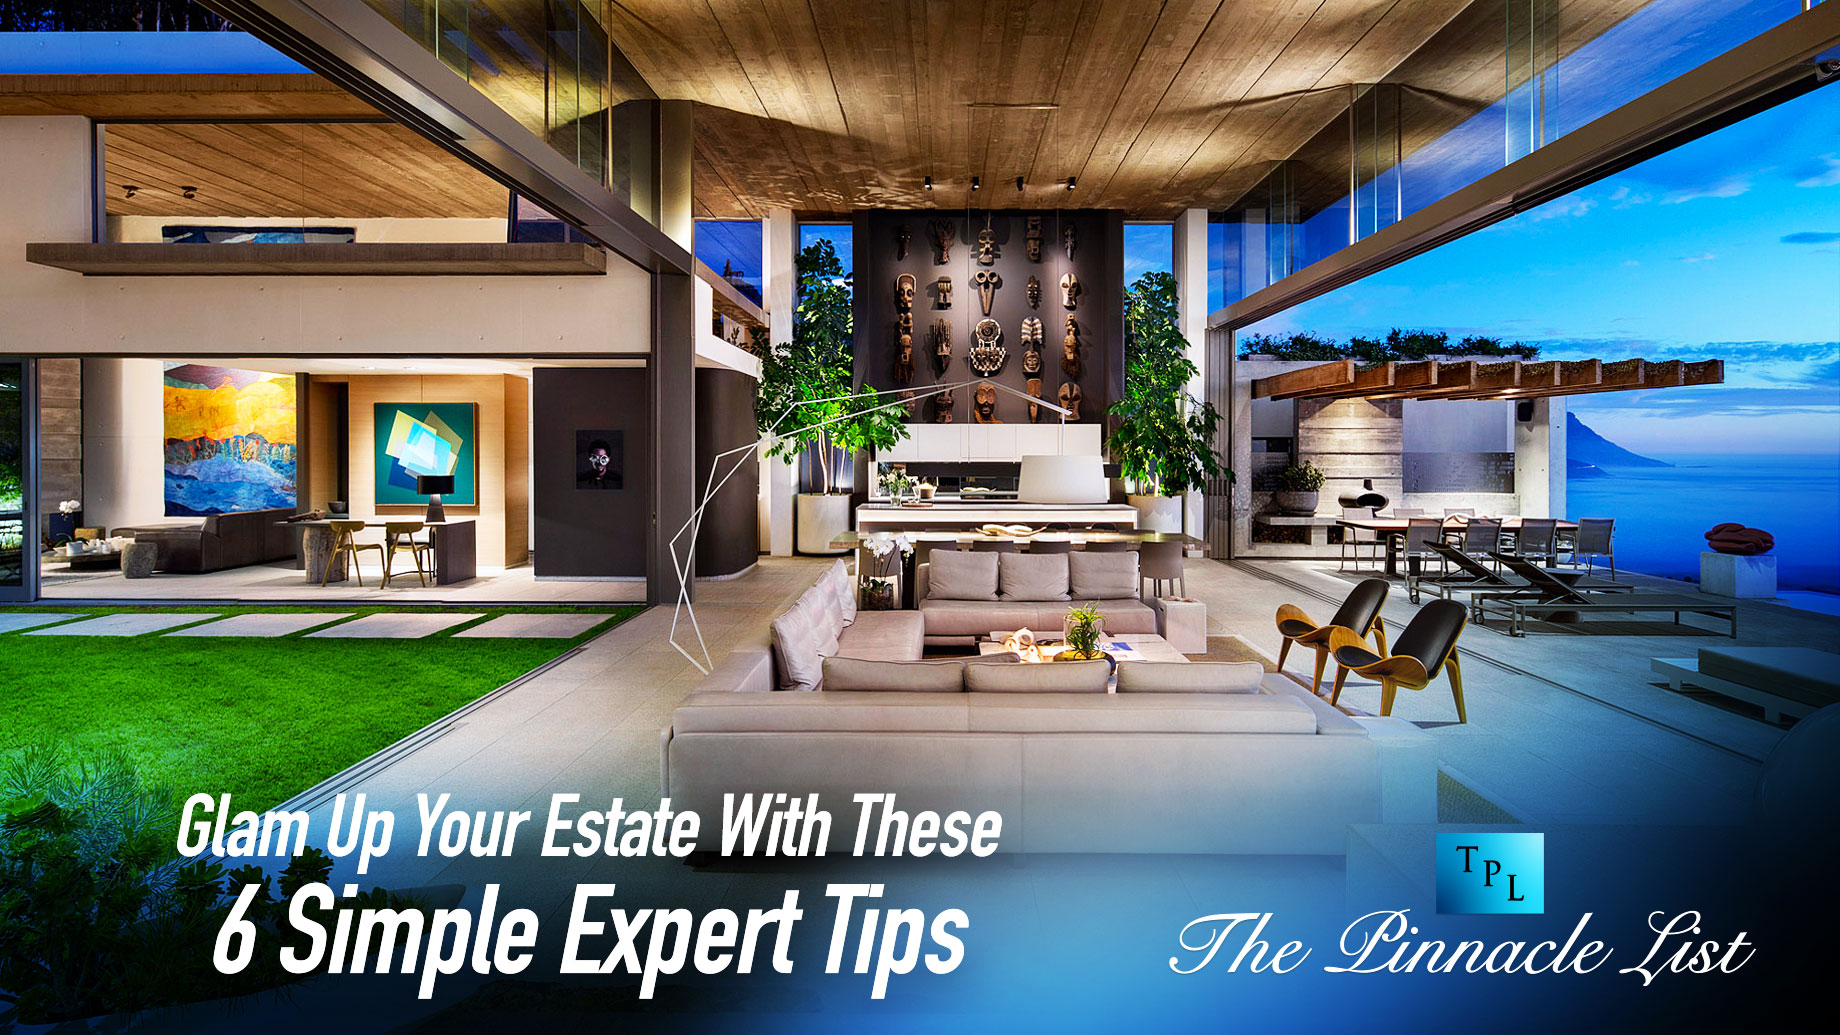 Glam Up Your Estate With These 6 Simple Expert Tips